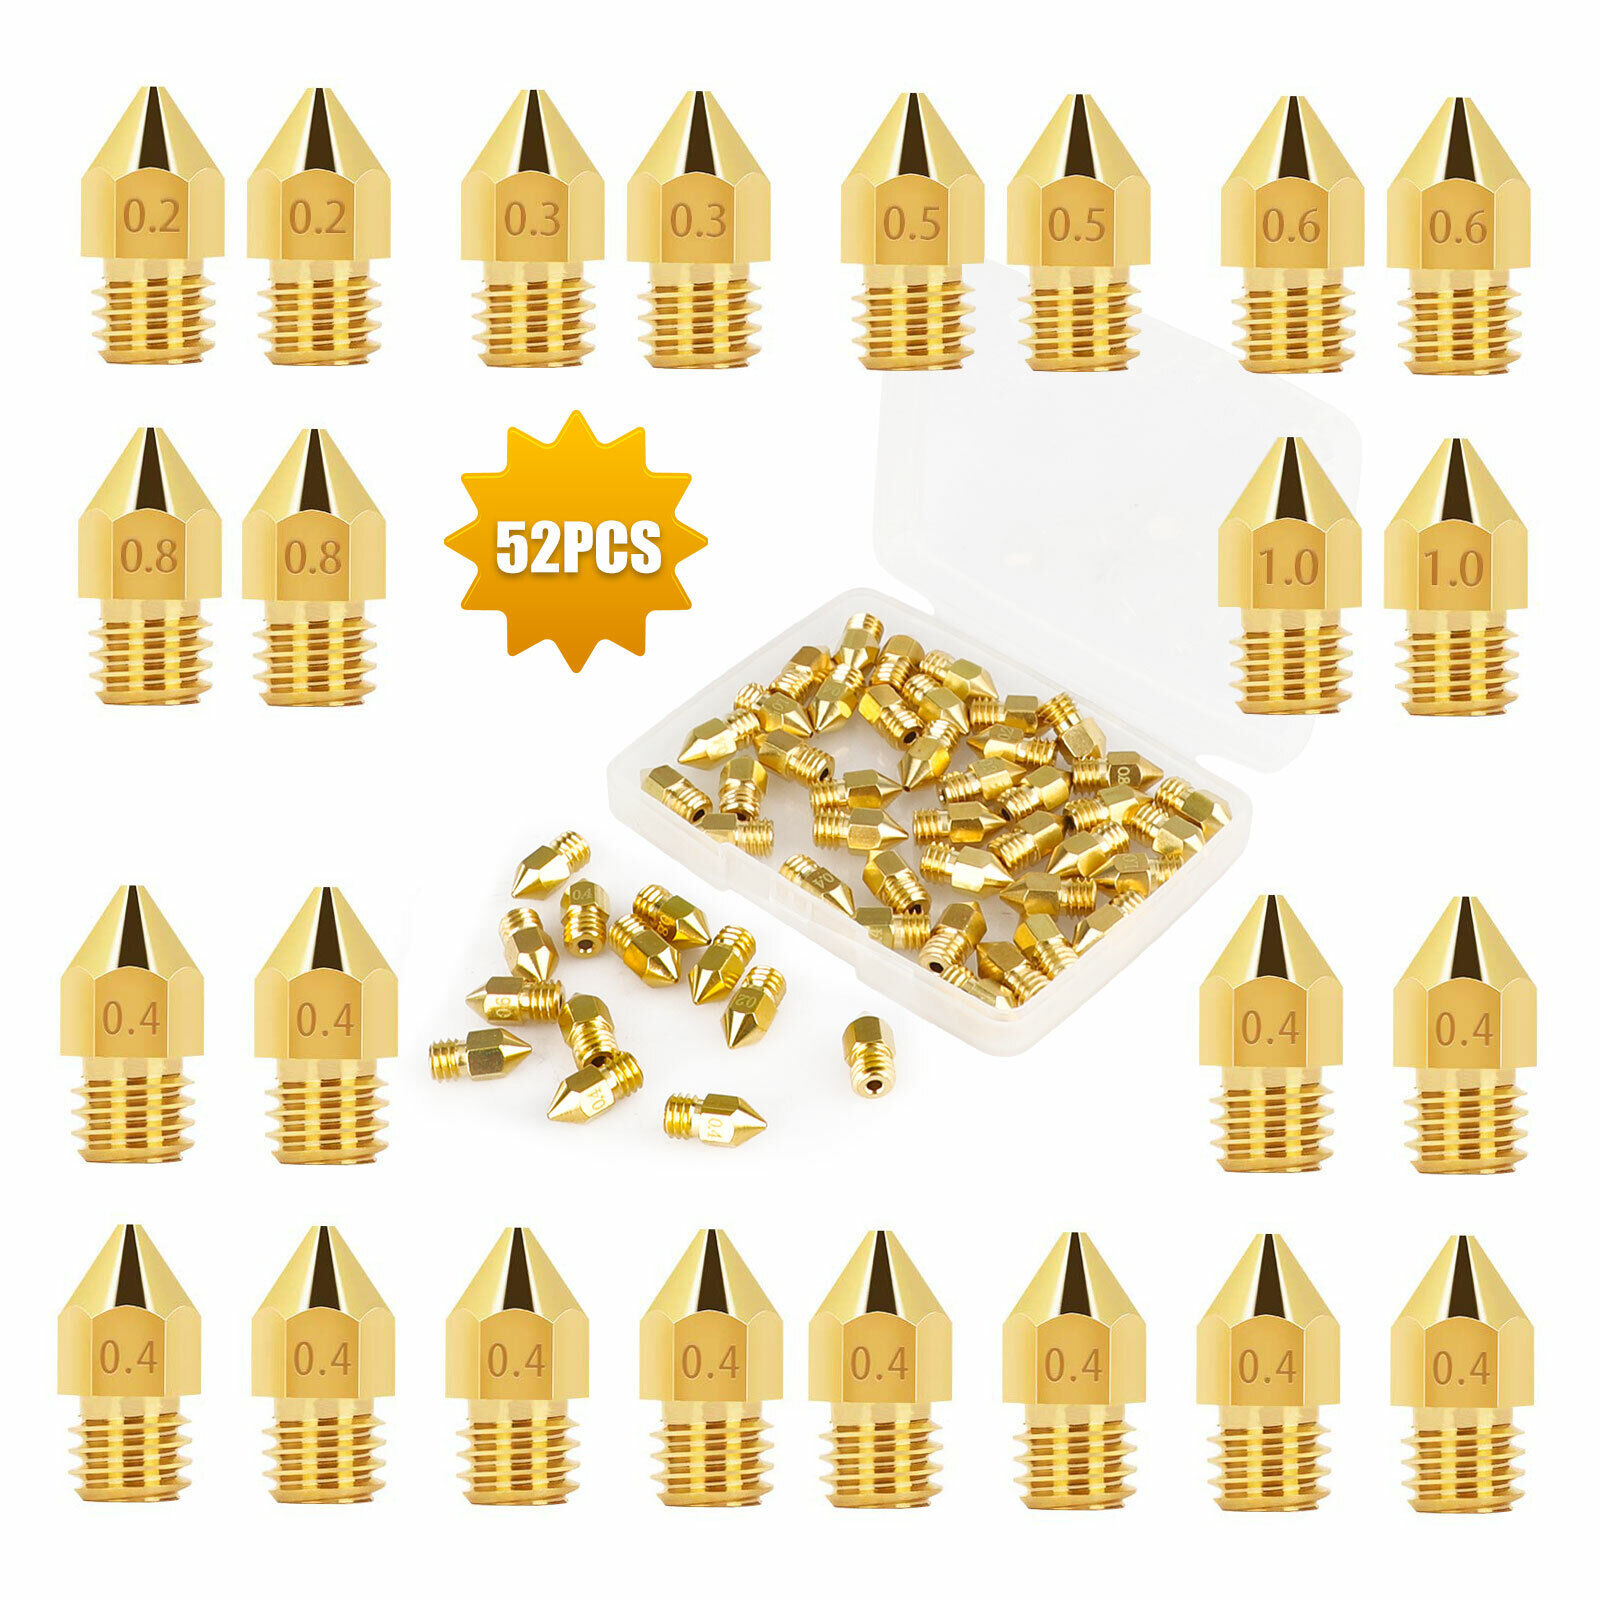 52PCS for Makerbot Creality CR-10 MK8 3D Printer Extruder Spring Nozzles Upgrade